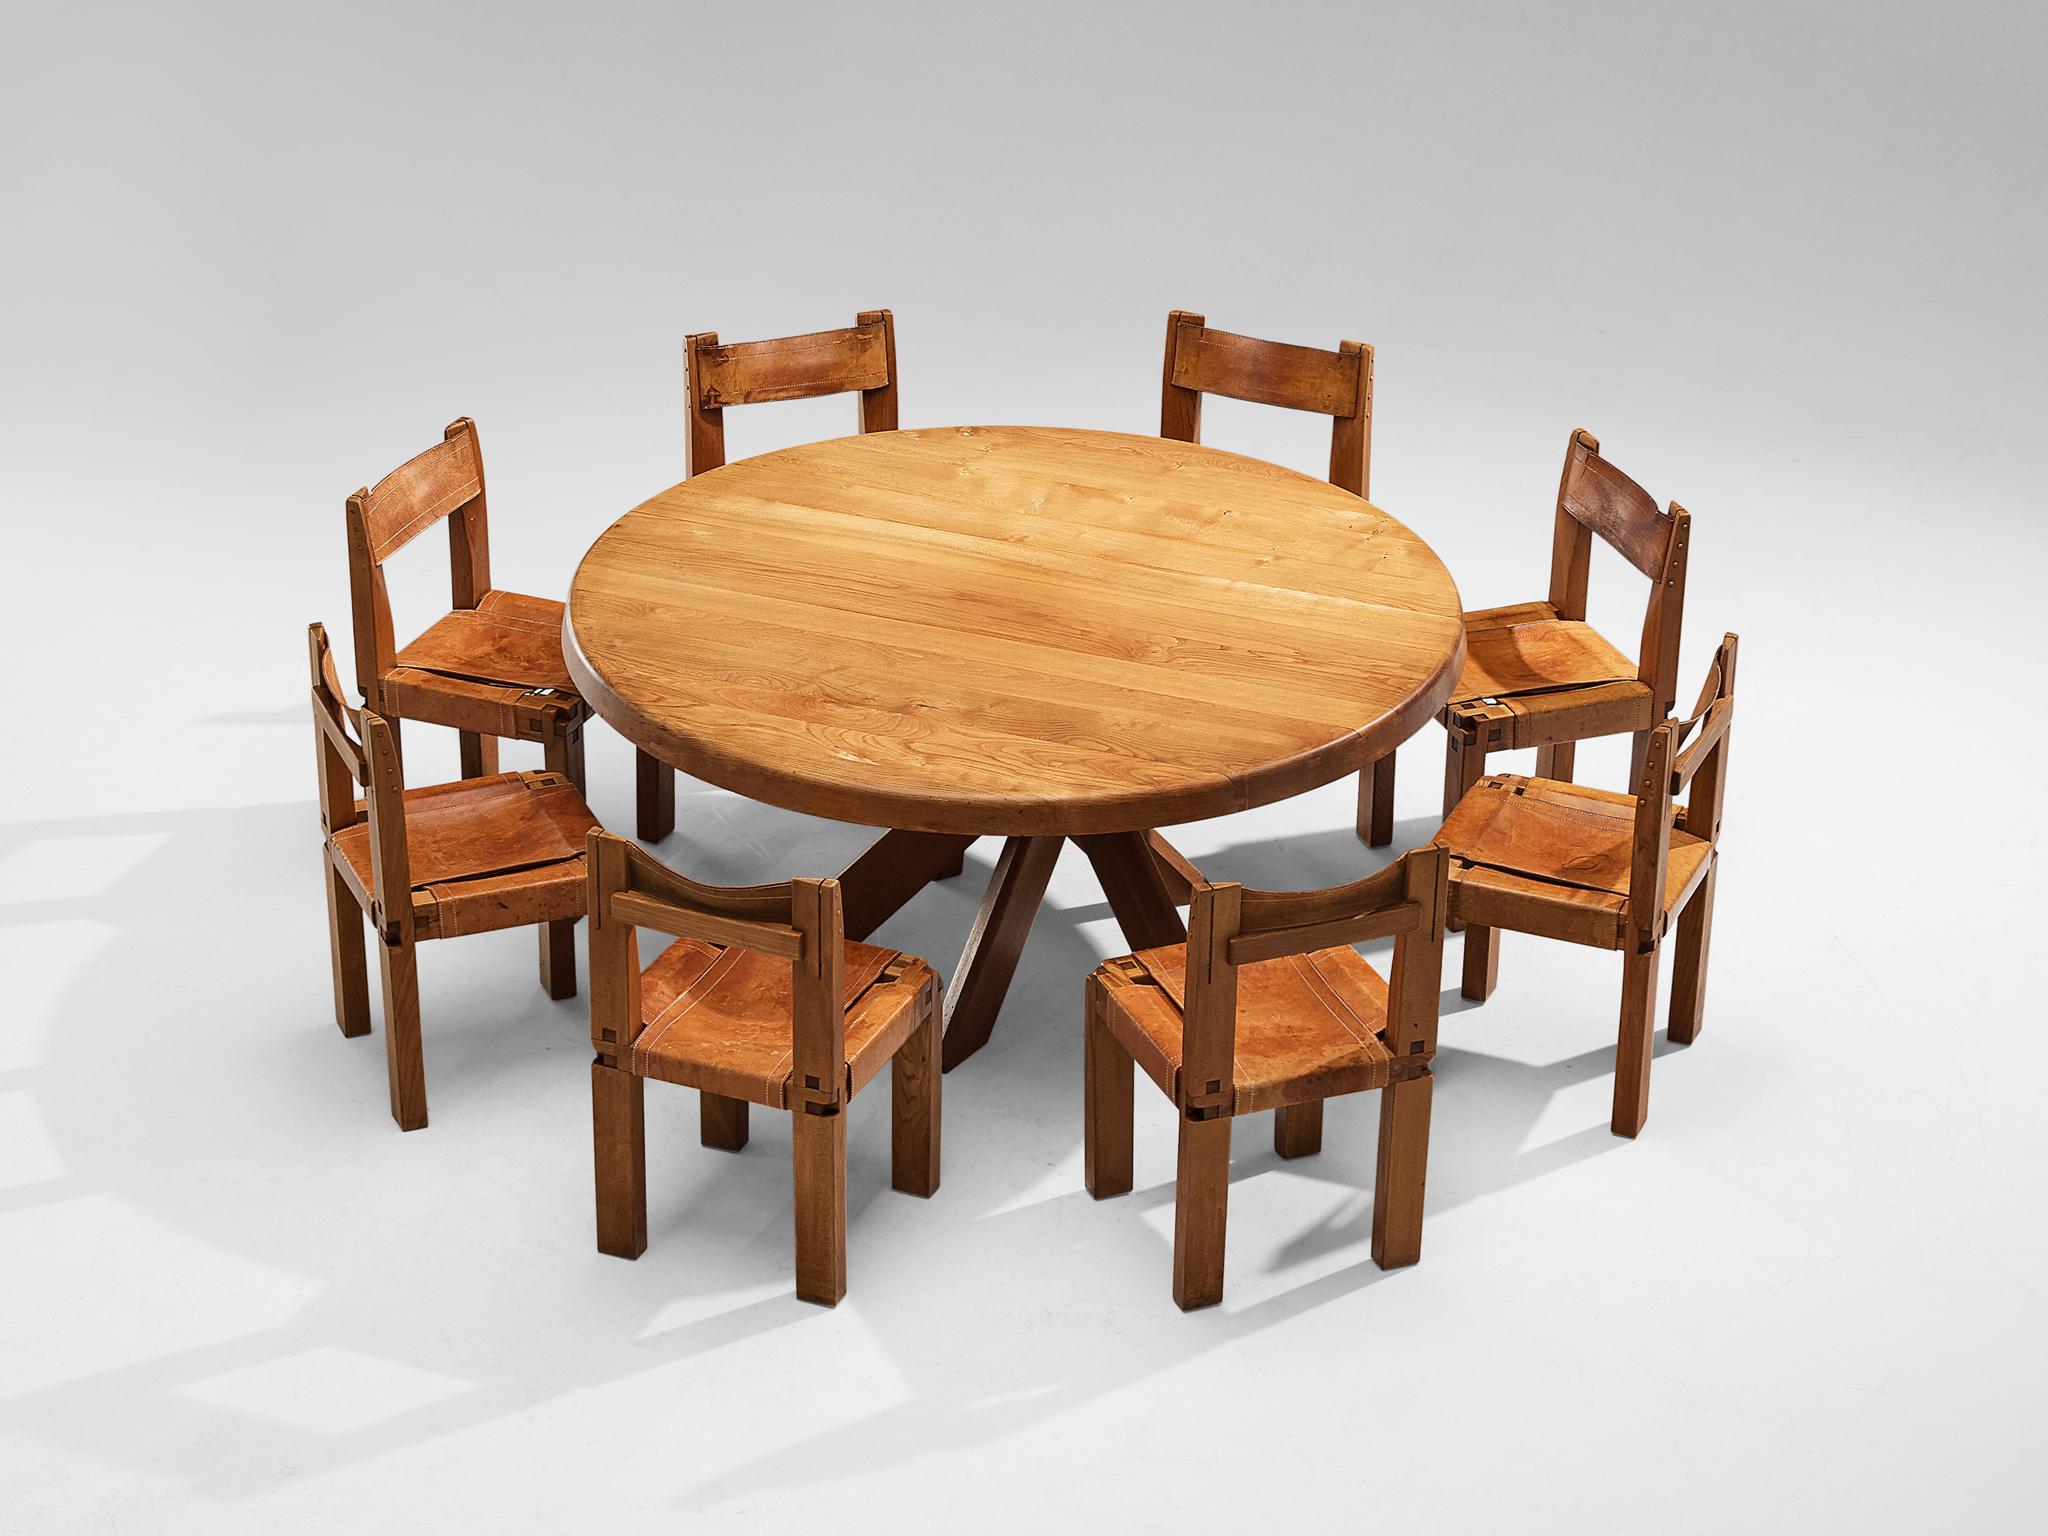 Pierre Chapo, set of one dining table model 'T21E' and eight dining chairs model 'S11', elm, France.

Pierre Chapo, dining table model 'T21E', elm, France, 1973

This round 'T21 E' dining table is designed by Pierre Chapo and its table top has a